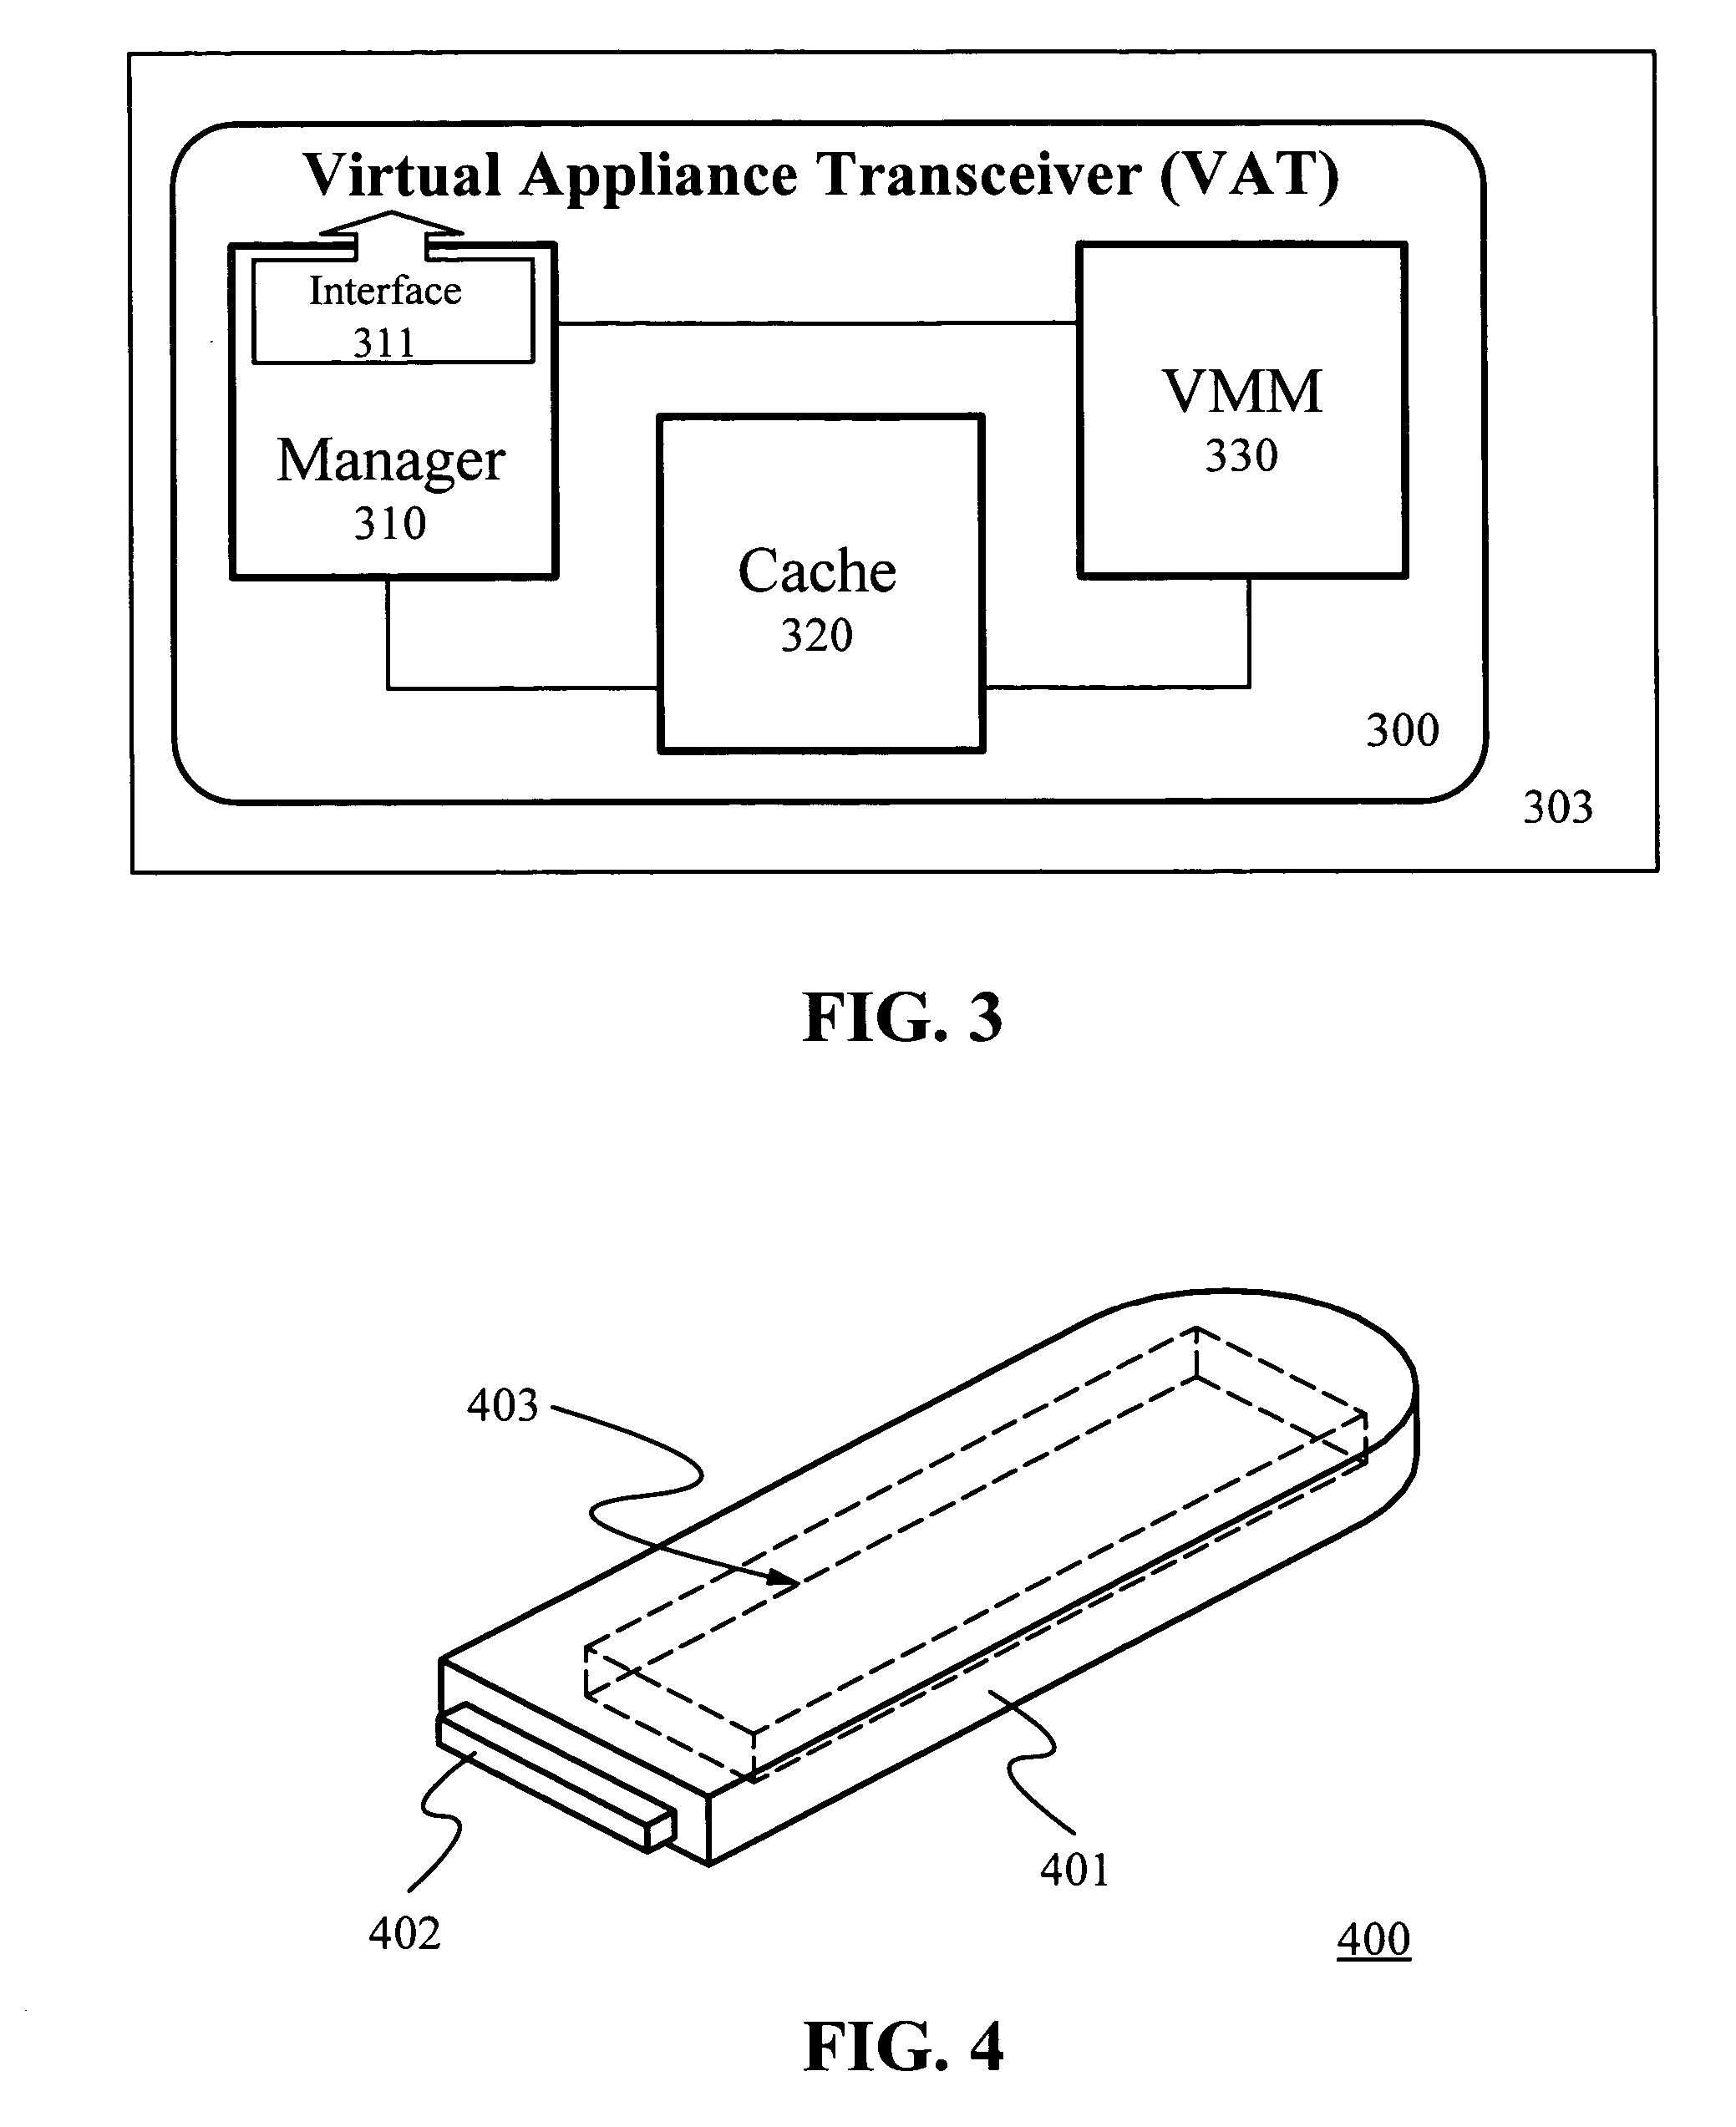 Cache-based system management architecture with virtual appliances, network repositories, and virtual appliance transceivers